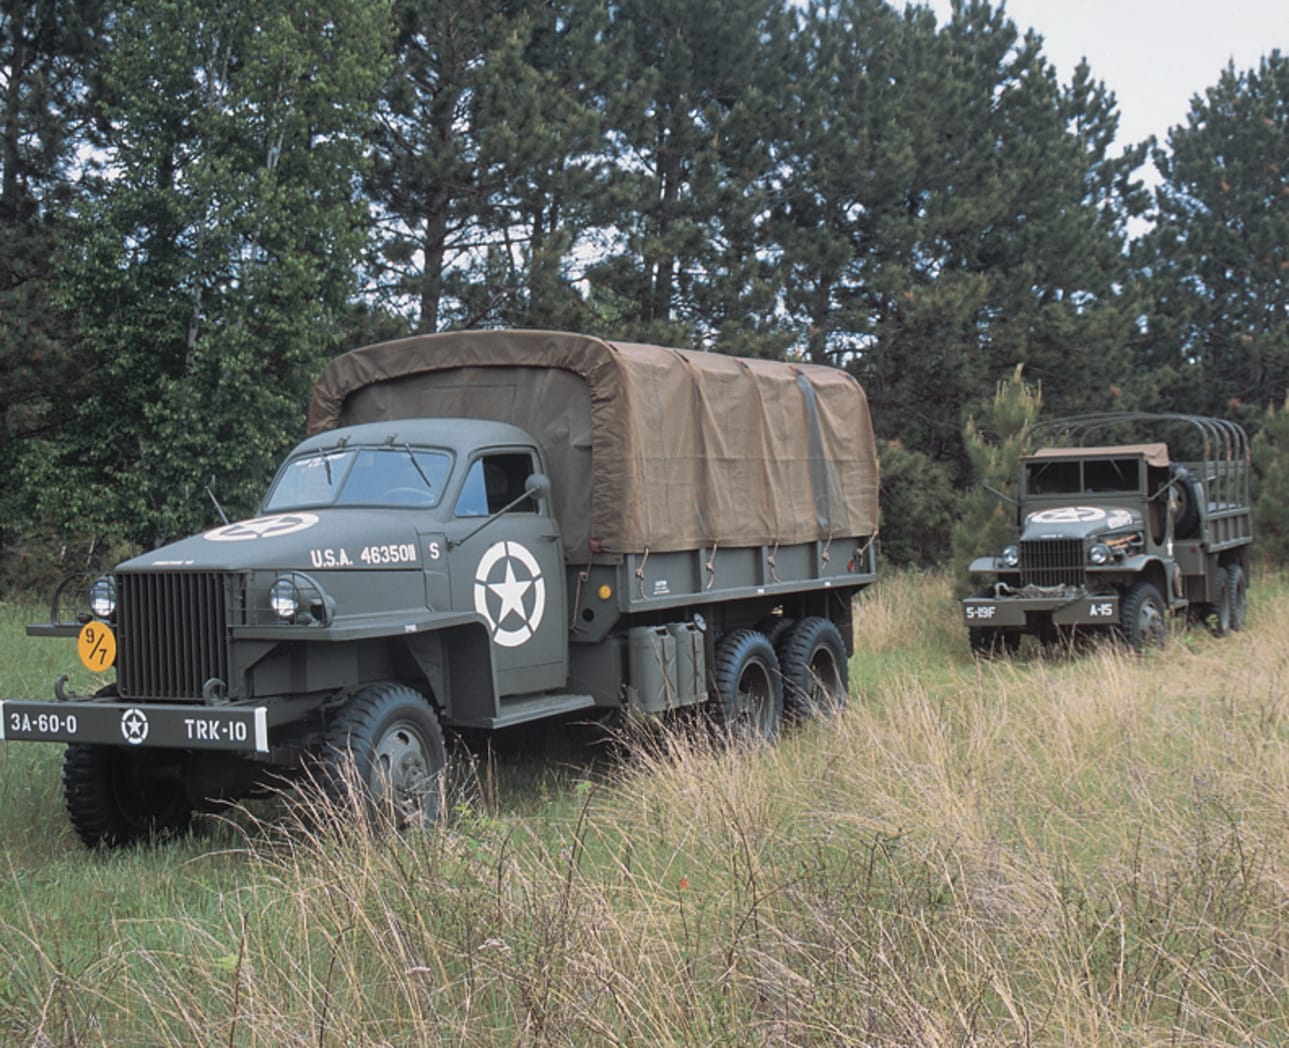 5. Two and a Half Ton Military Vehicles (CCKW, M135, M211, M35, etc.)